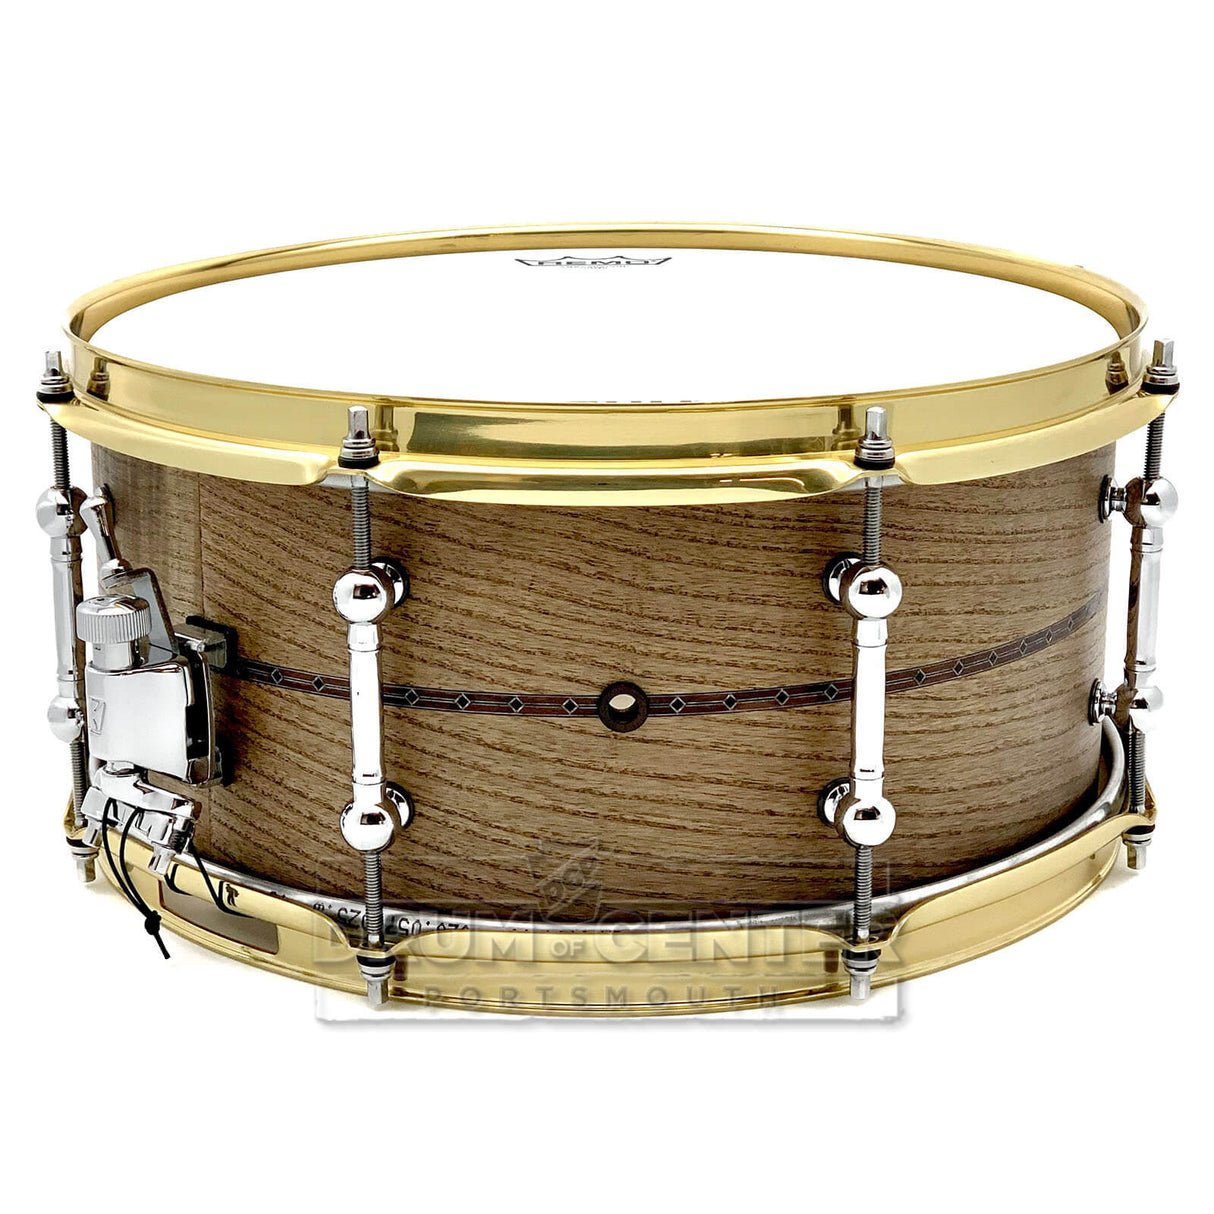 Tama Star Reserve Solid Curly Ash Snare Drum 14x6.5 - DCP Exclusive! - Drum Center Of Portsmouth